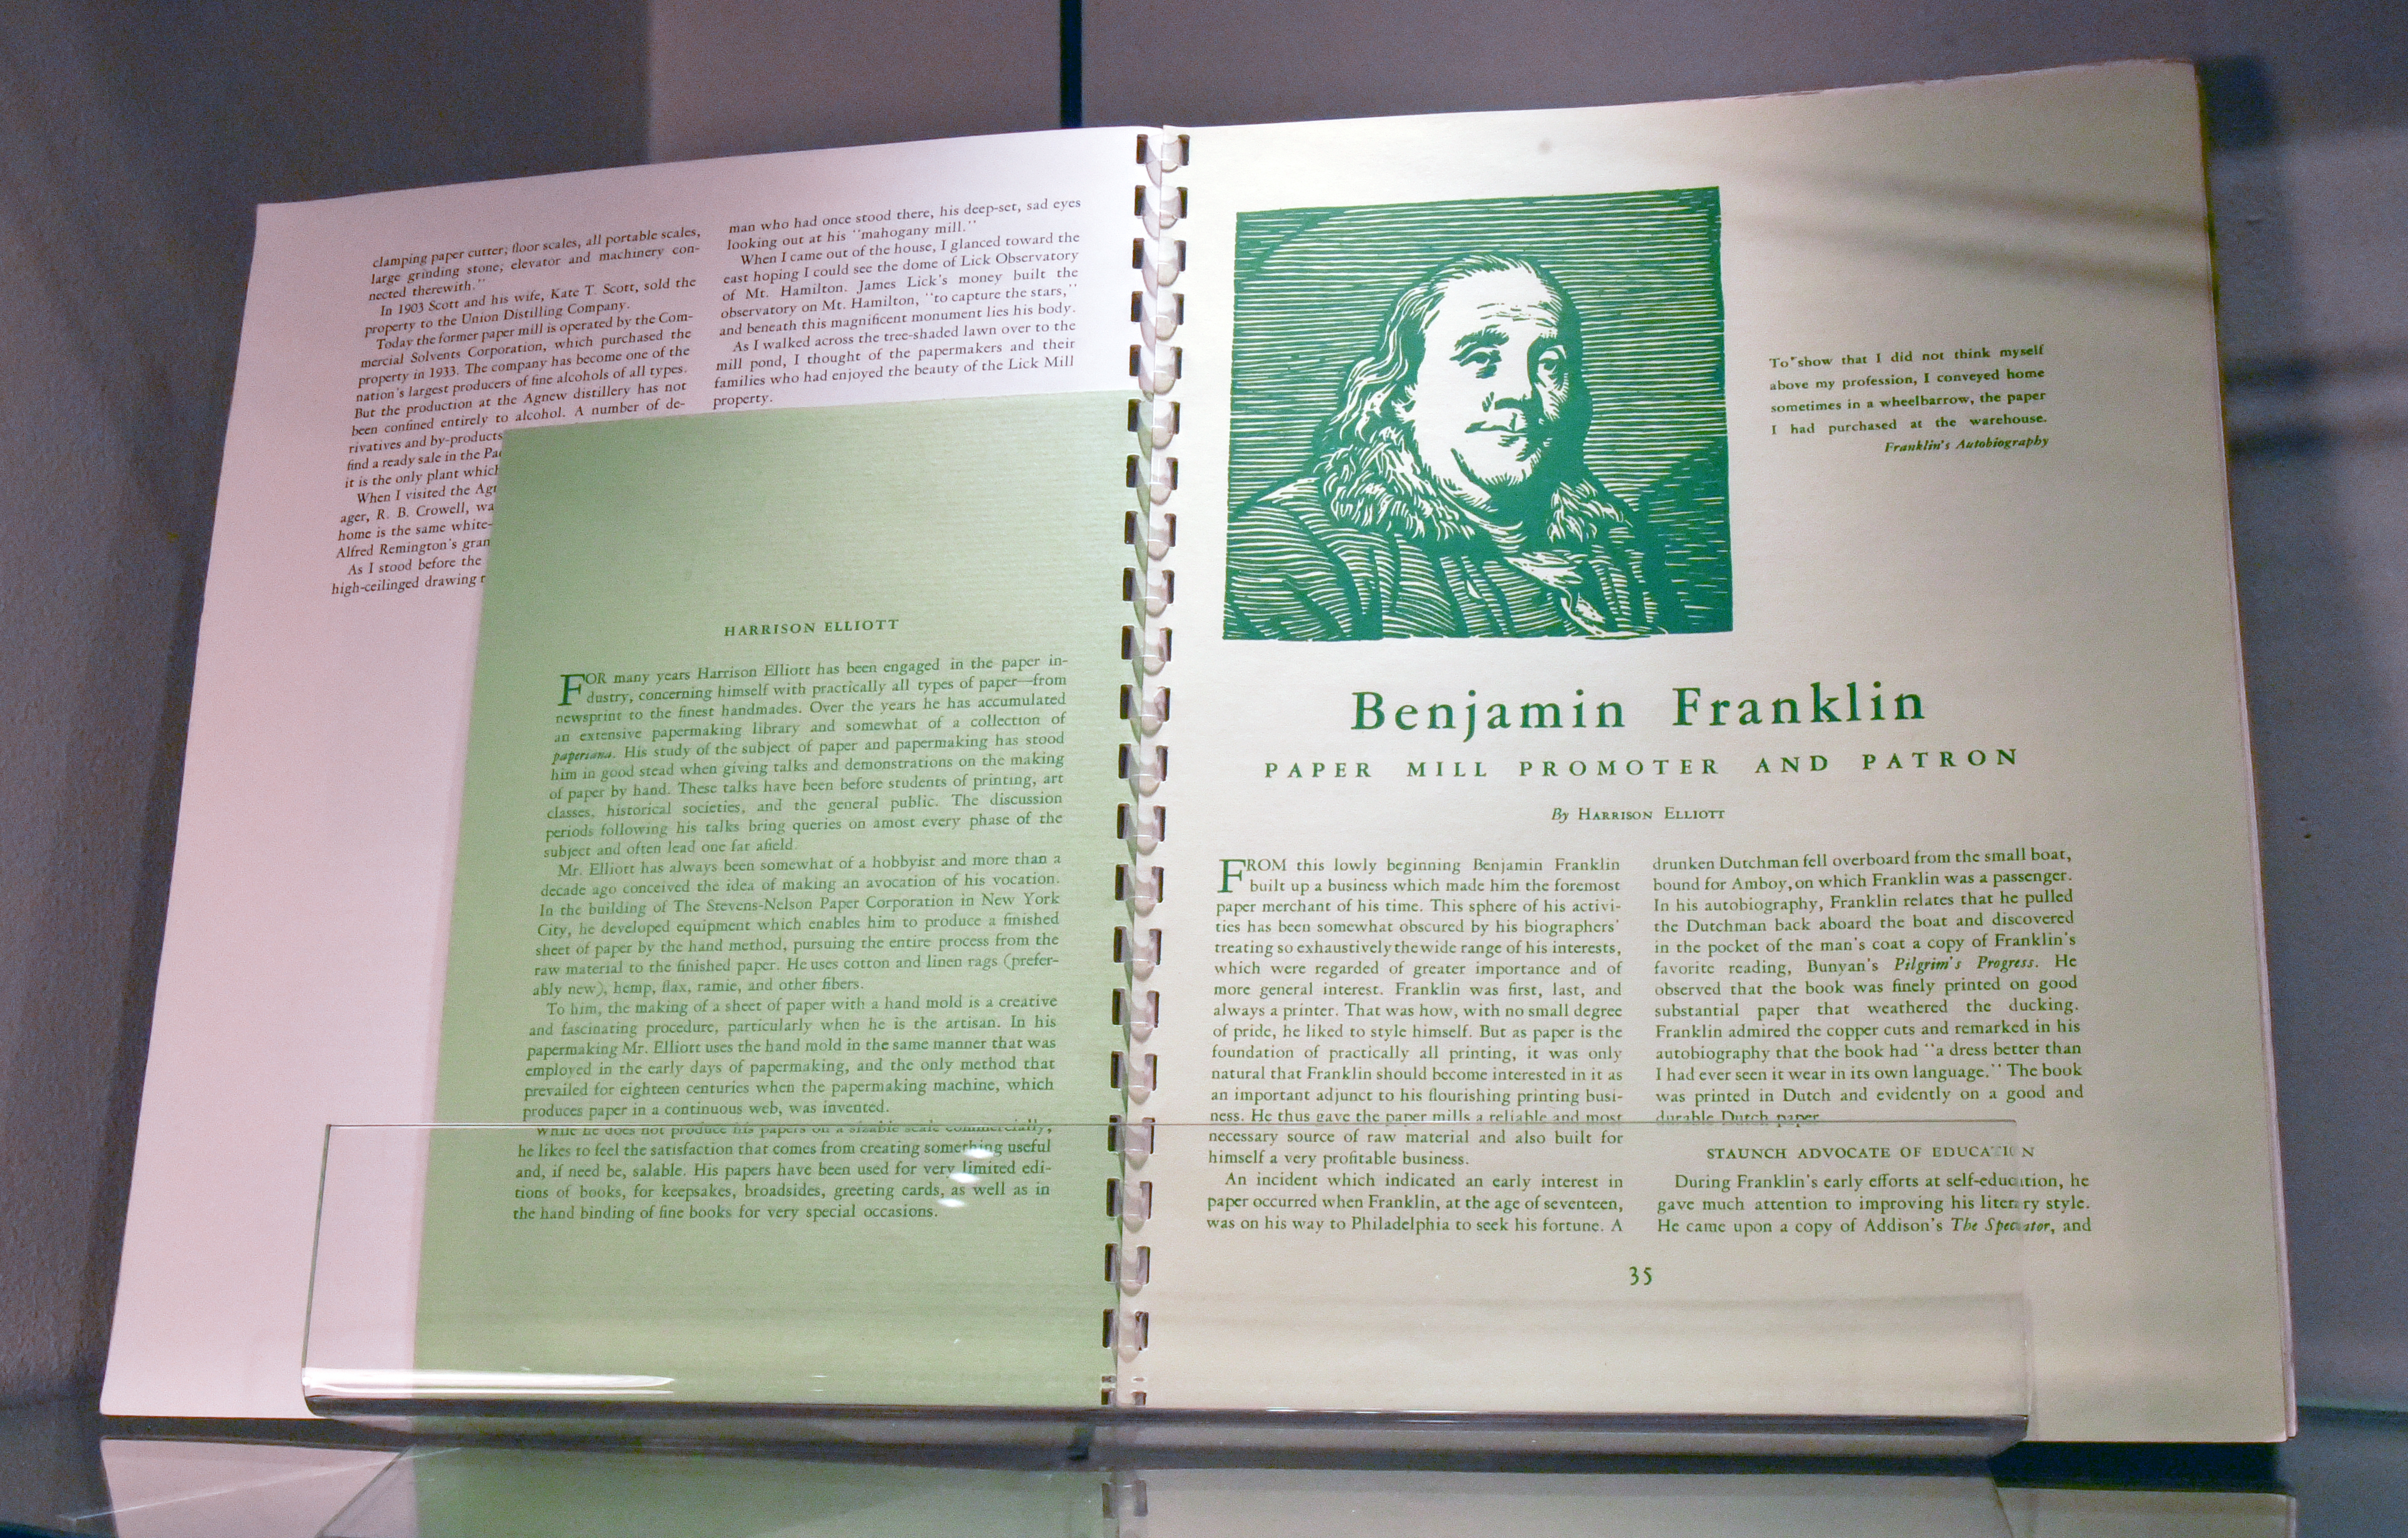 An edition of The Paper Maker open to an article titled "Benjamin Franklin: Paper Mill Promoter and Patron" written by Harrison Elliot. There is also a small green paper that gives a brief background of Harrison Elliot and his work.